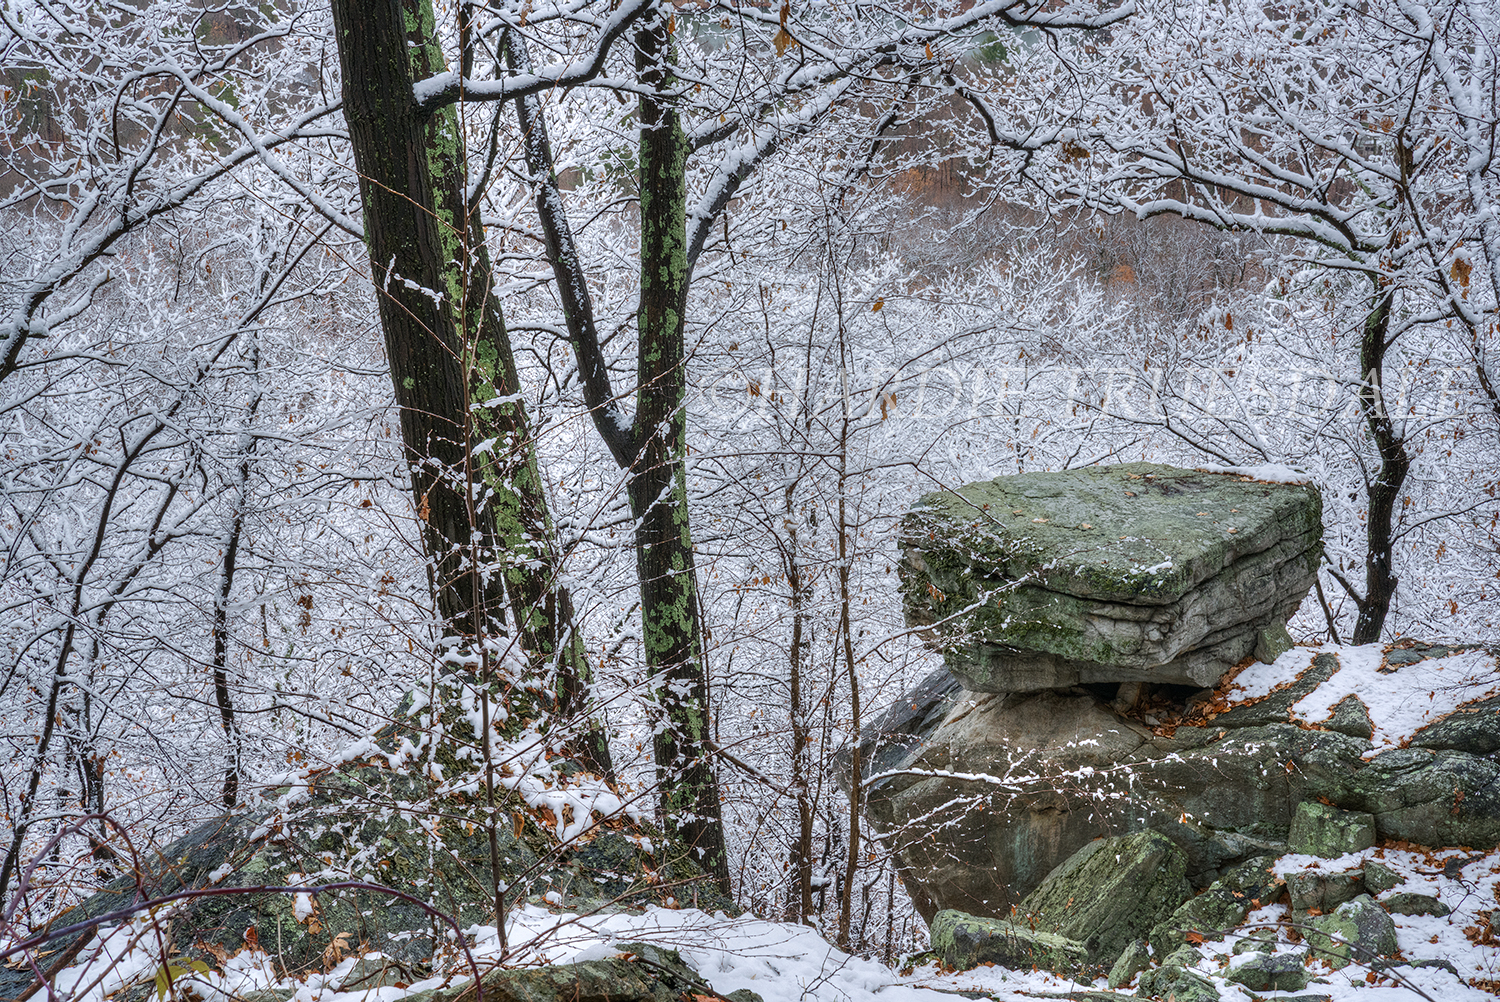 Gas#902 "Delicate Snowfall, Lunch Table Rock"